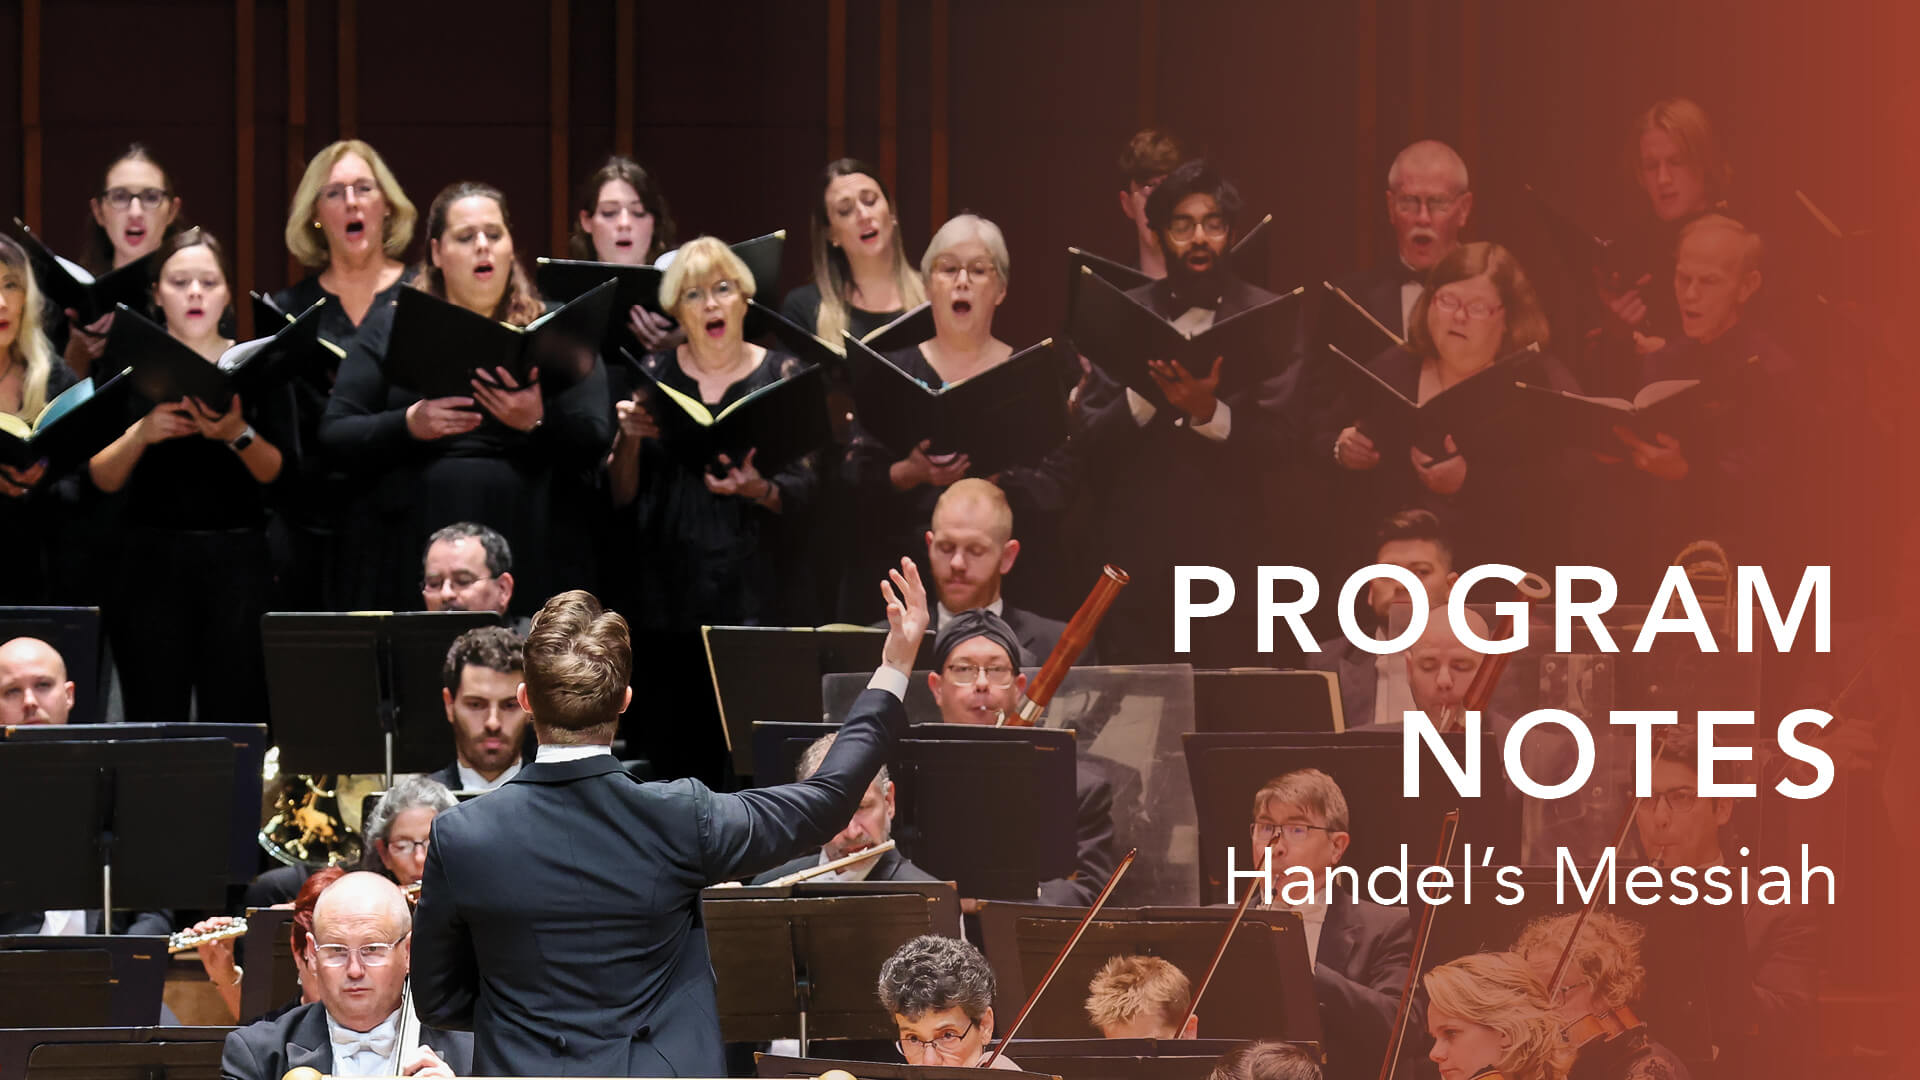 Featured image for “Program Notes: Handel’s Messiah”